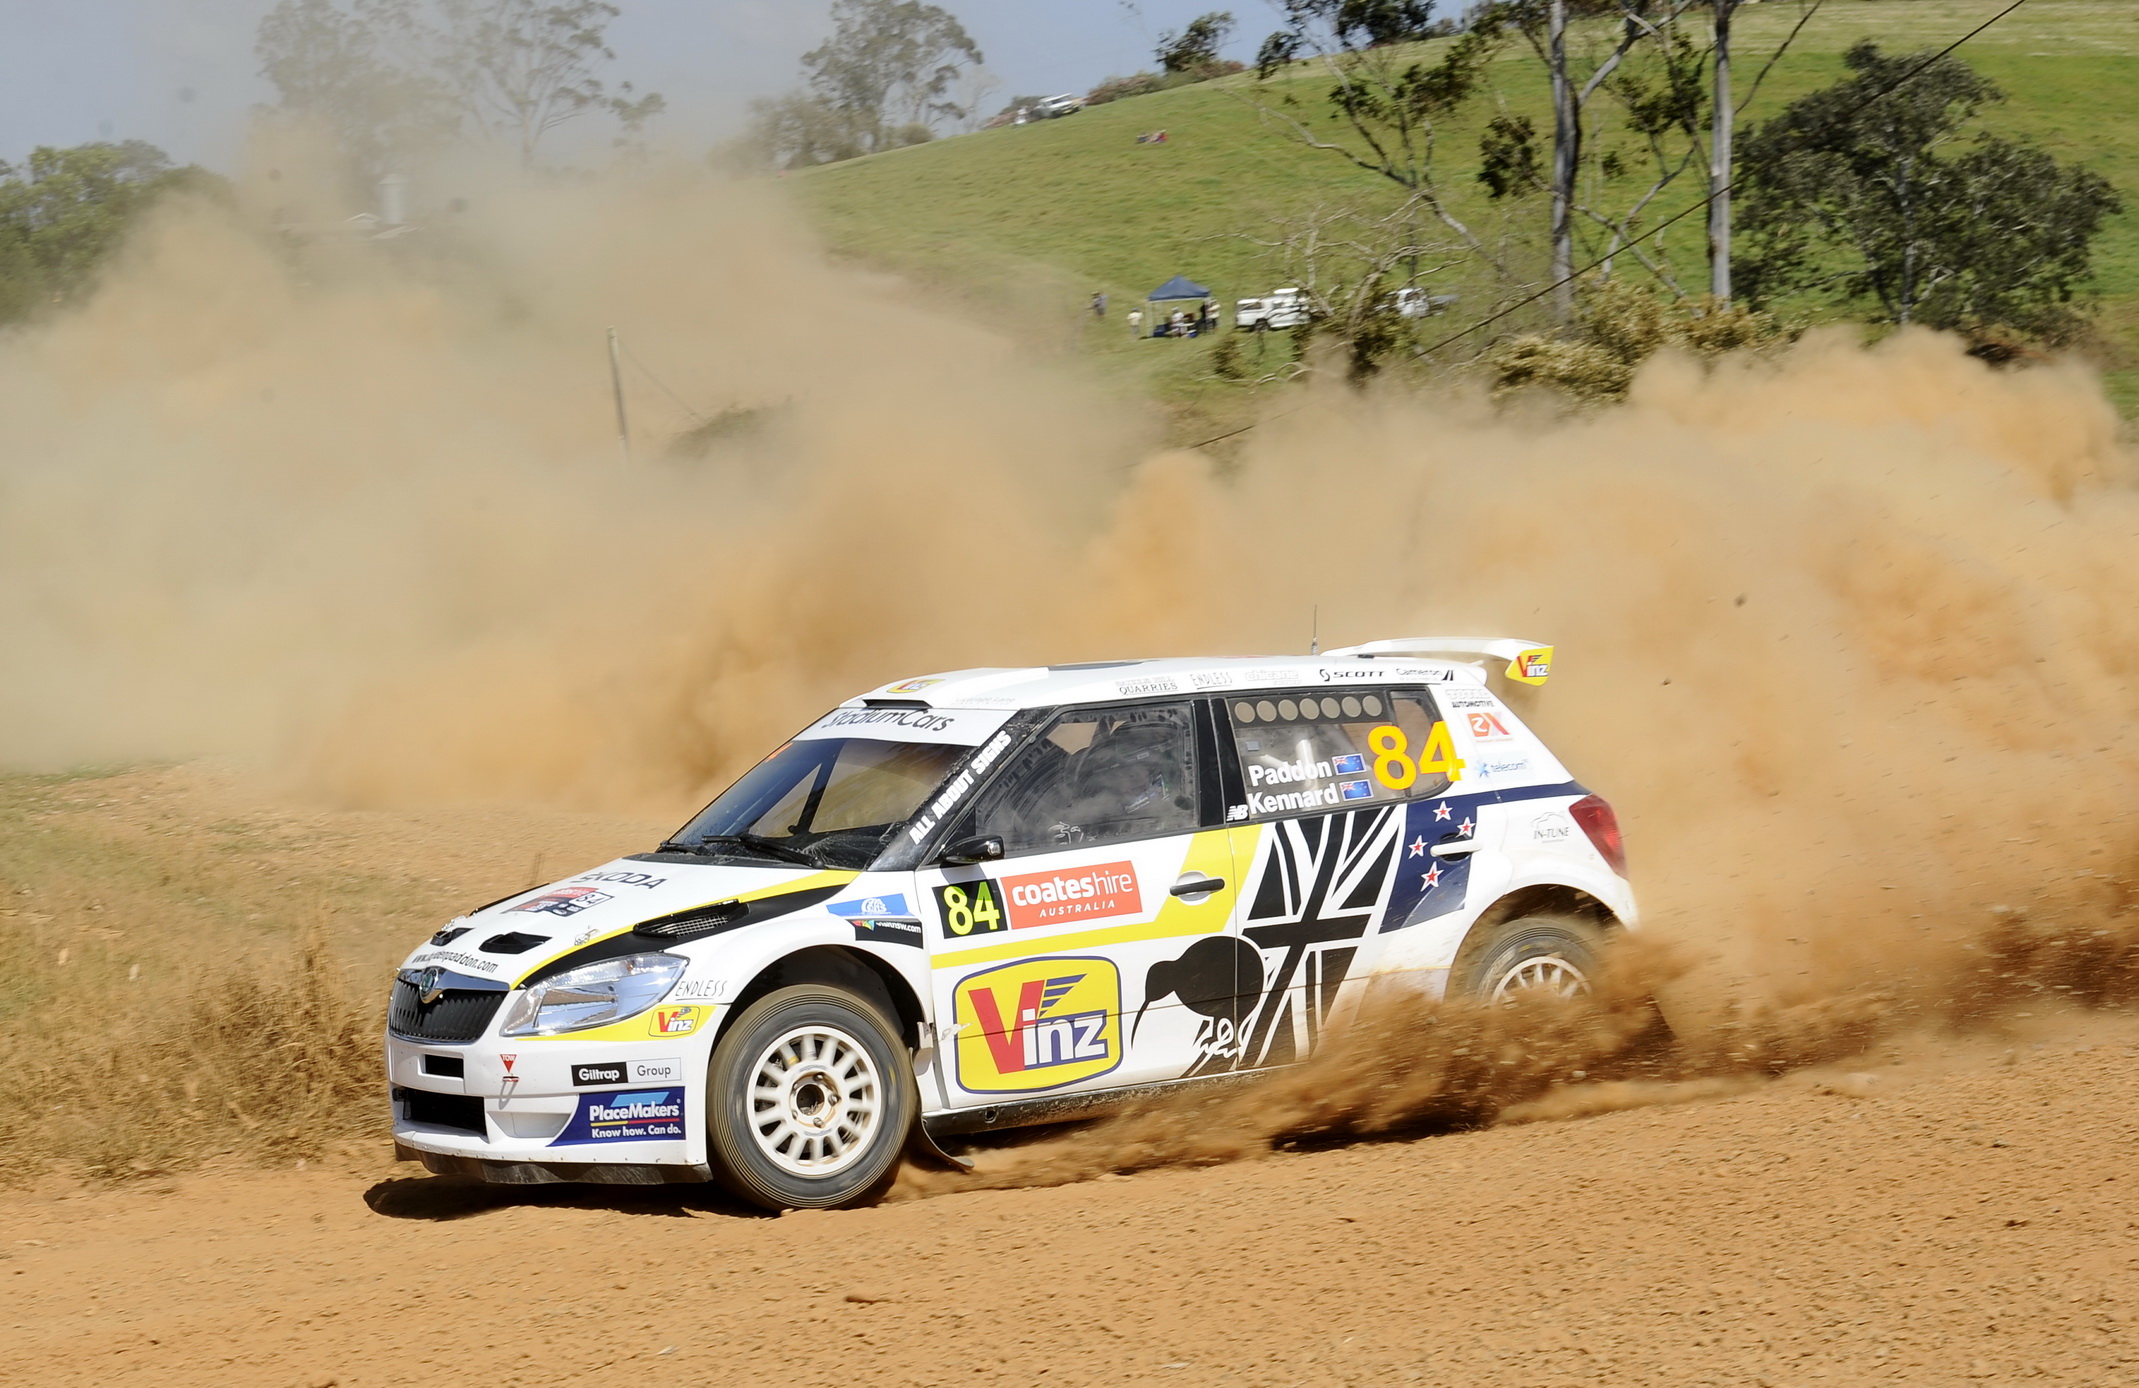 Stage wins for Paddon on Day 2 fightback